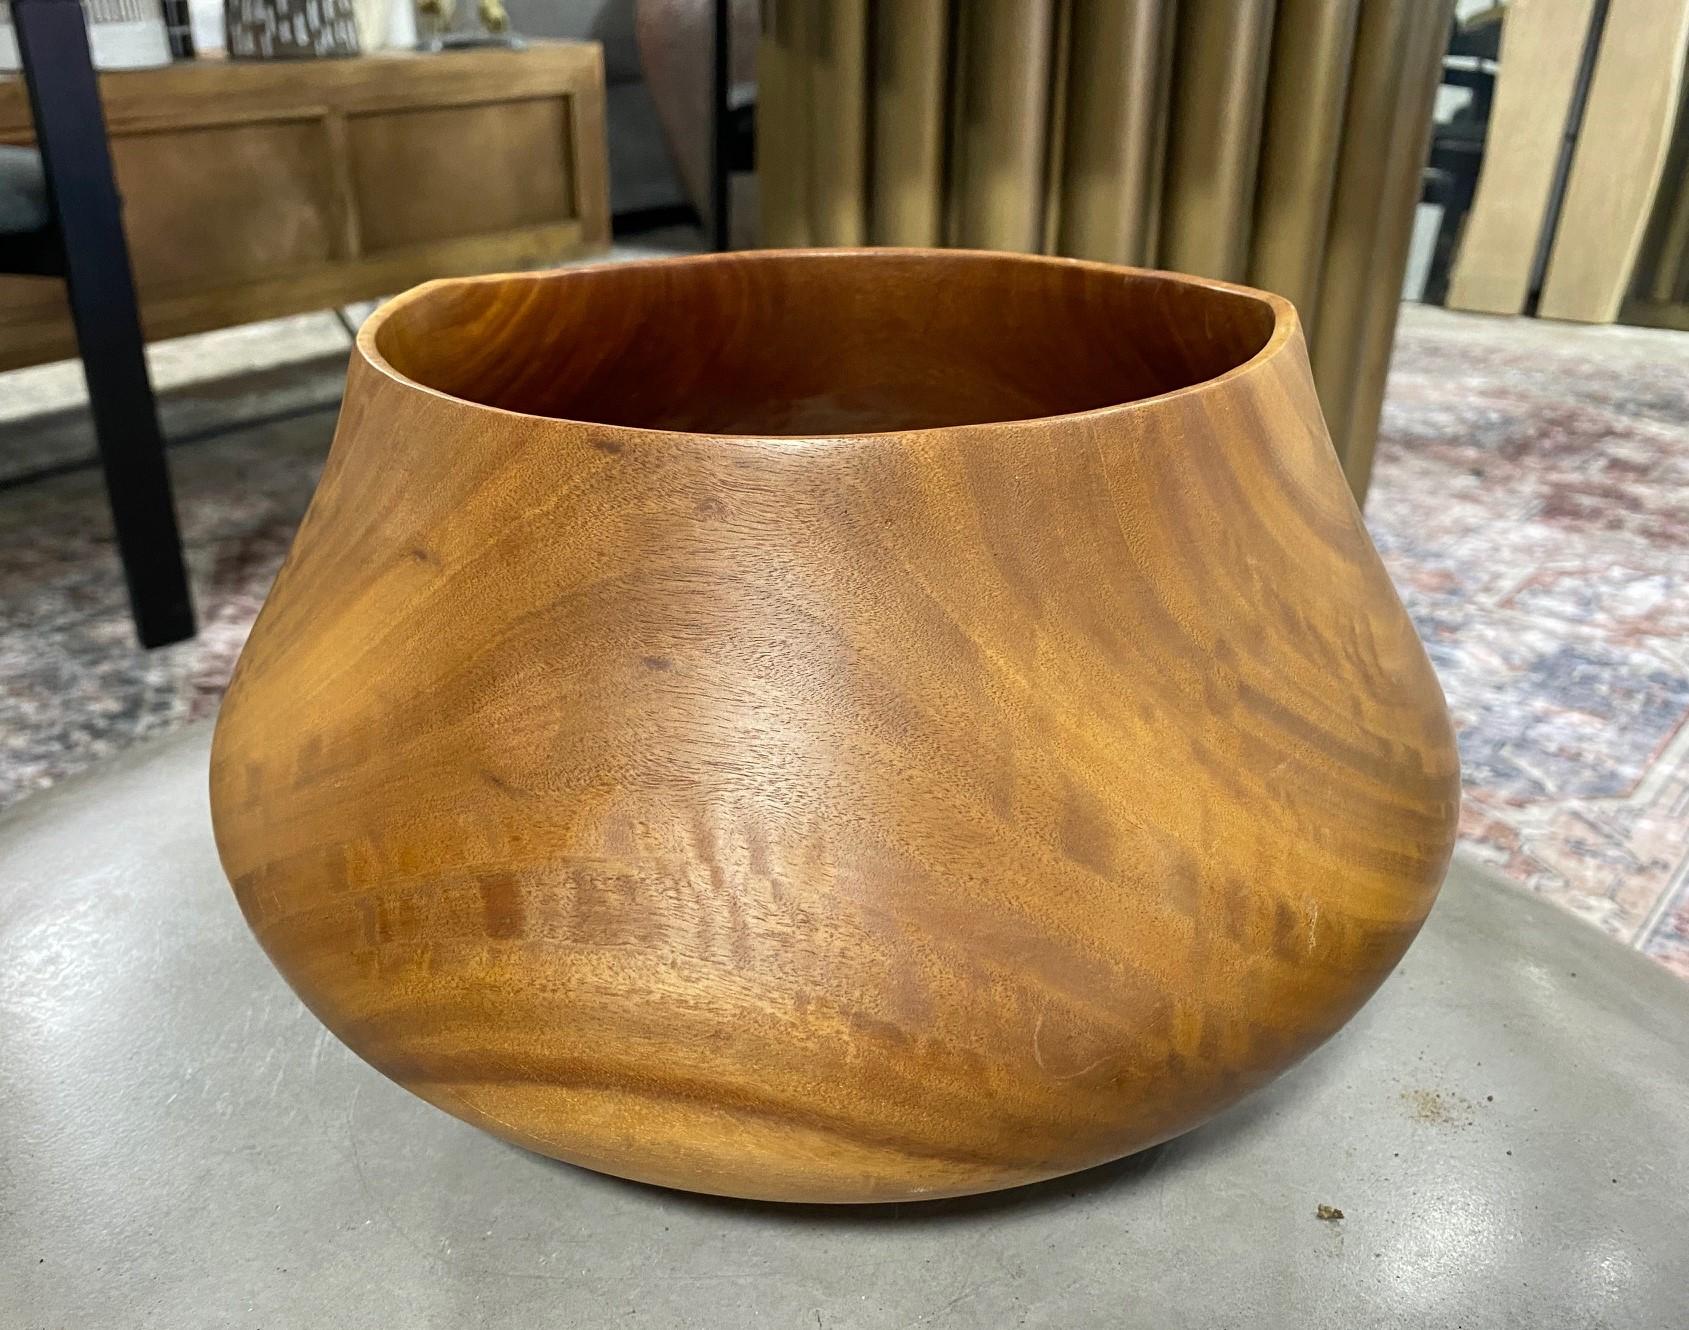 A wonderful work. Clearly made by a master woodturner. Beautiful organic, natural shape and two-tone coloring. This bowl has a great feel and nice heft to it. 

Signed and dated (2009) by the artist on the base. 

Would make for a great addition